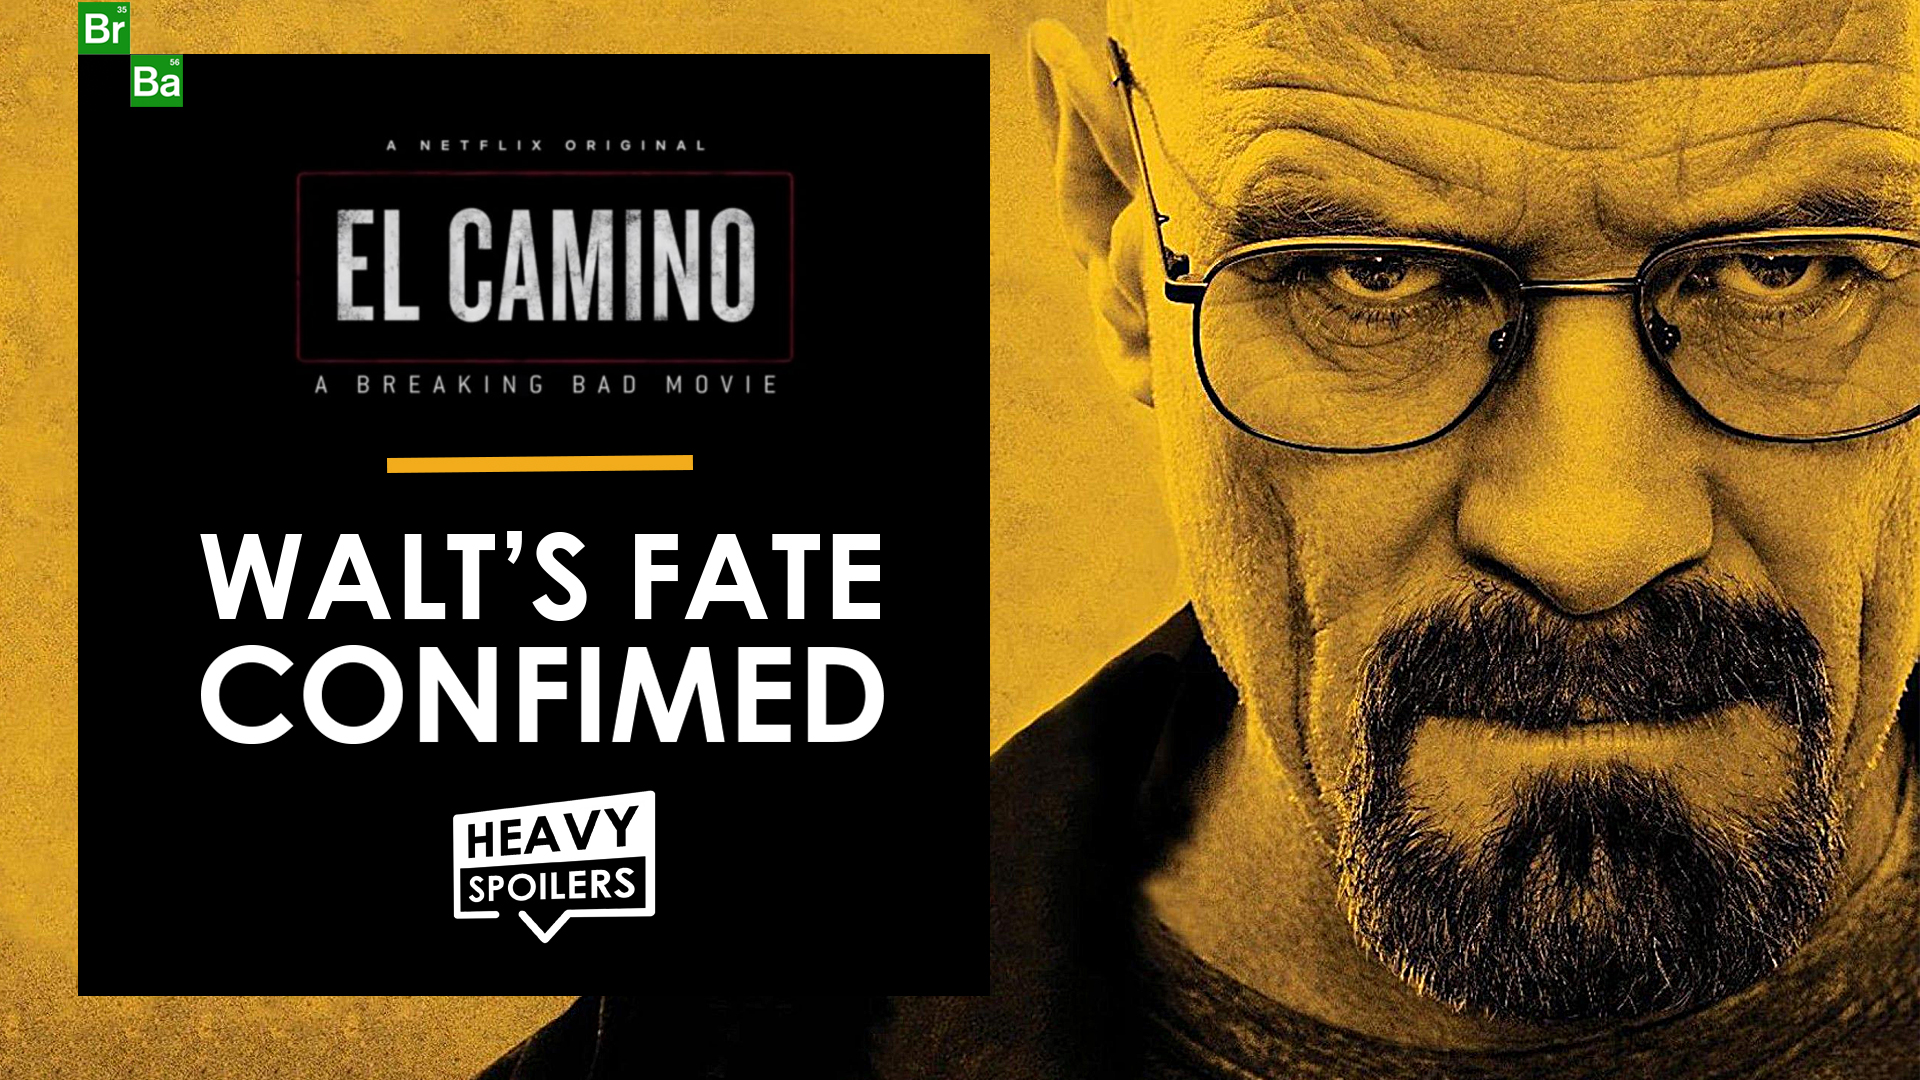 breaking bad movie el camino new emmys trailer is walter white alive or dead everything we know so far breakdown plot leaks release date full movie actors run time